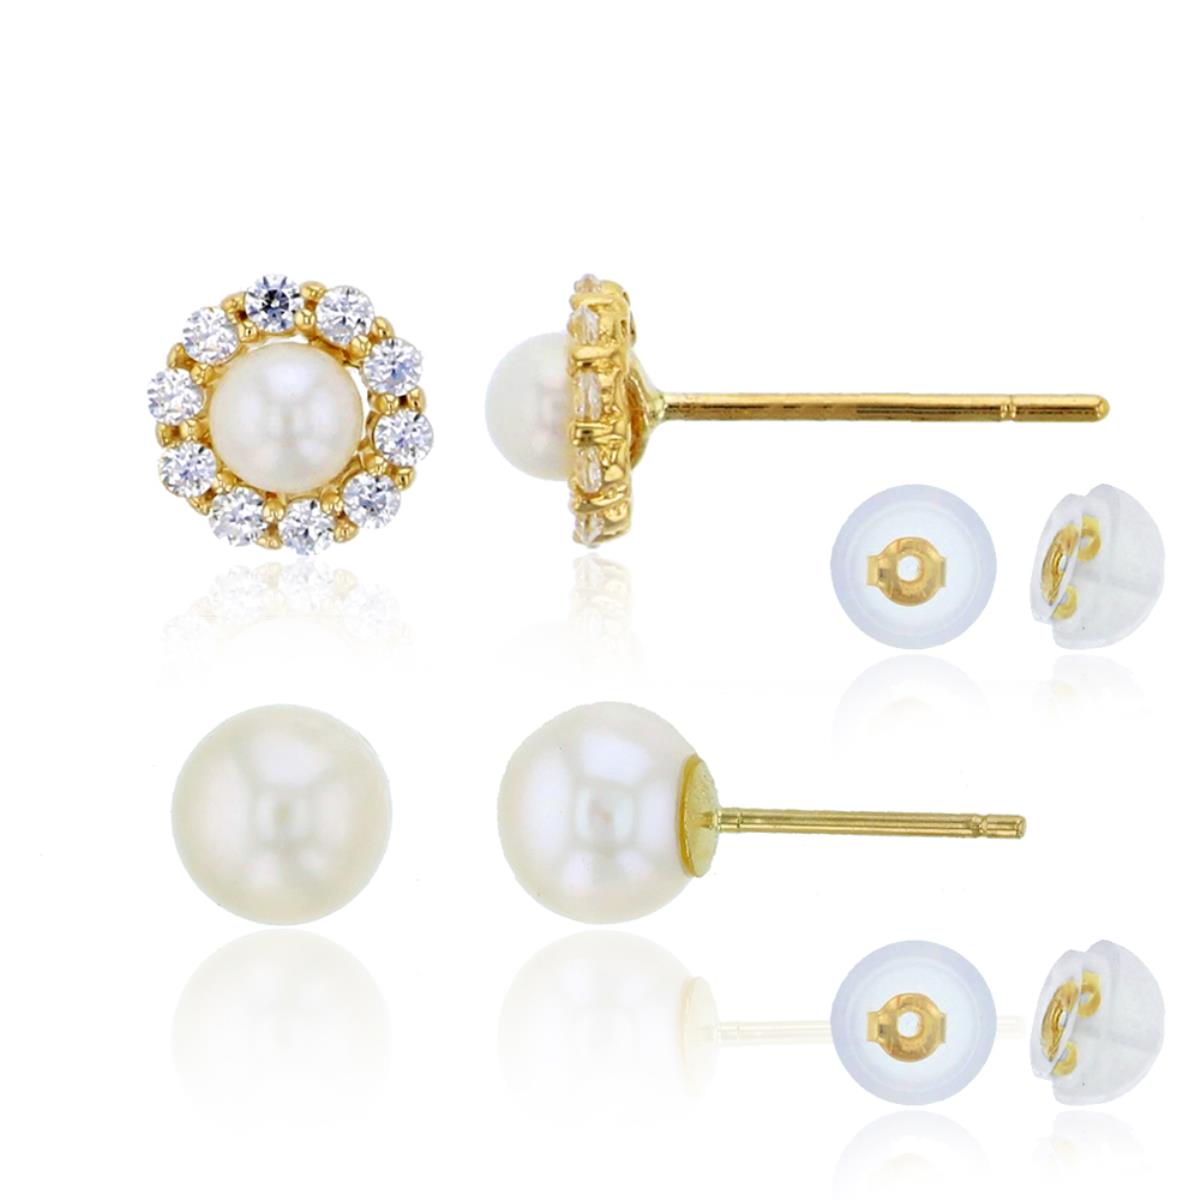 14K Yellow Gold Micropave FWP Flower & 6mm FWP Stud Earring Set